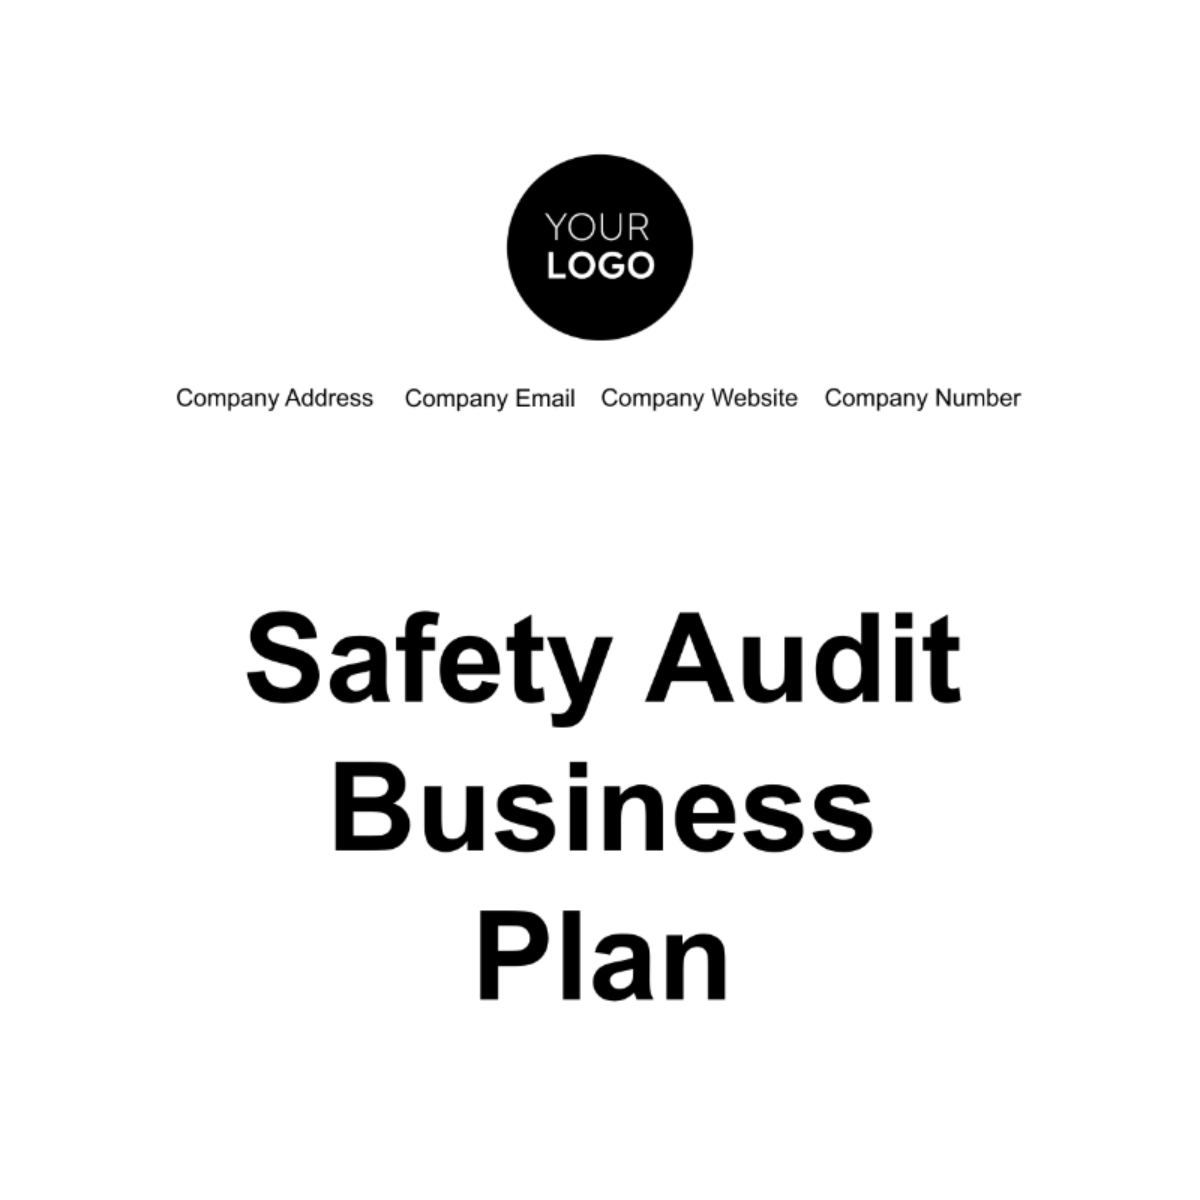 Free Safety Audit Business Plan Template